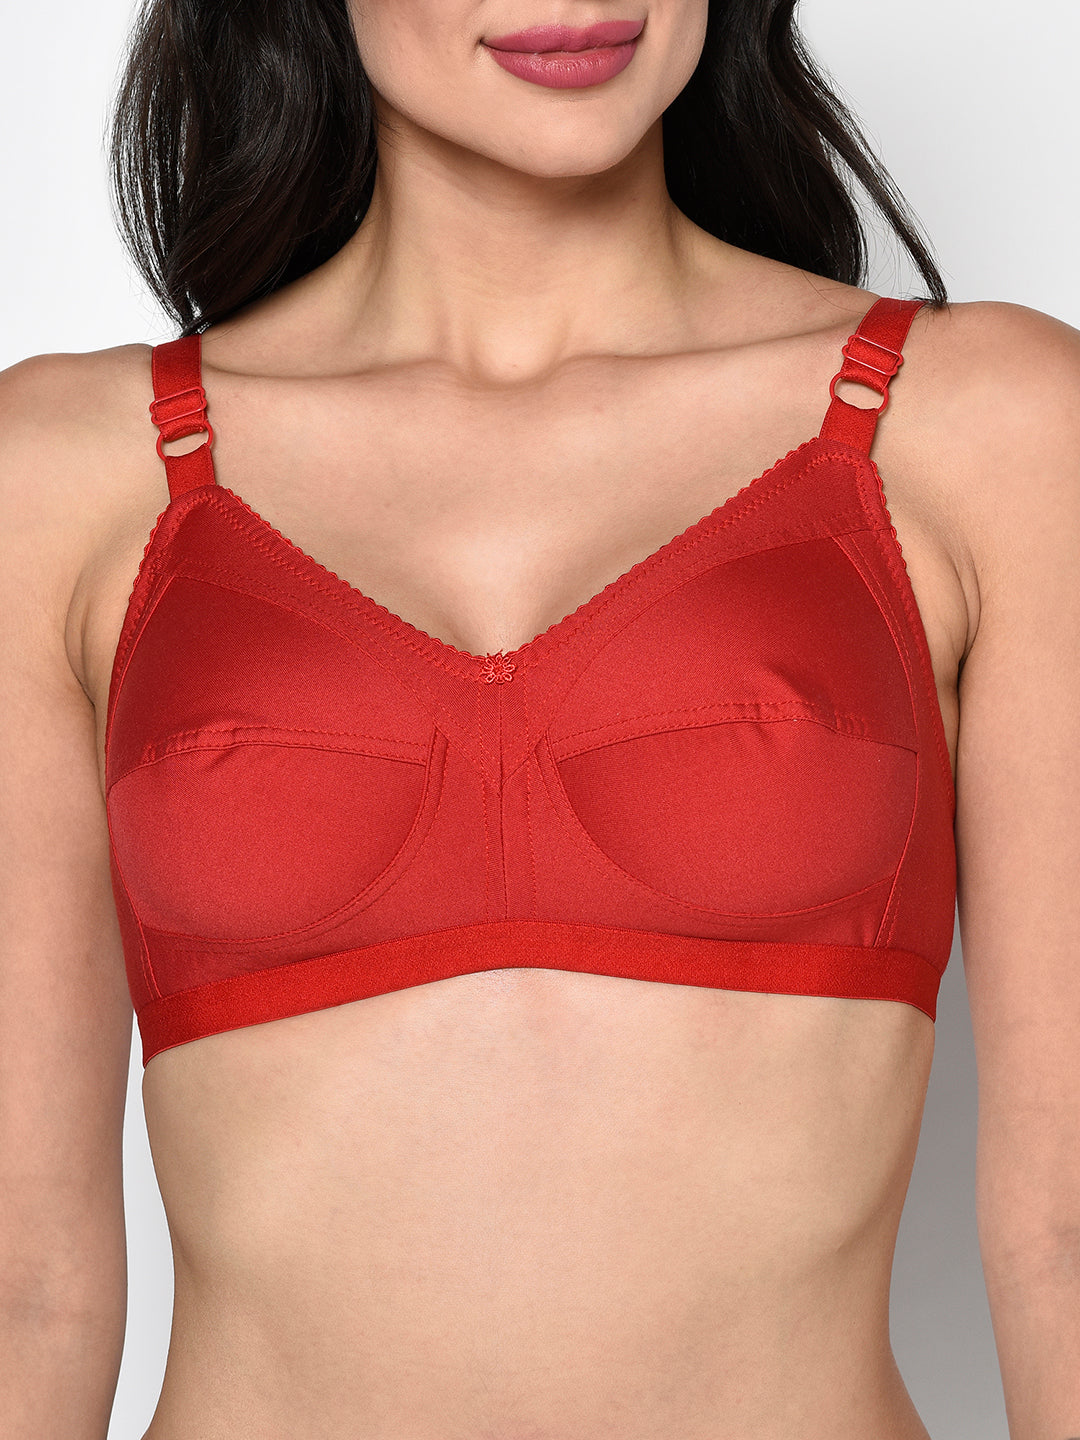 Women's Red Non padded Non Underwired Everyday Bra